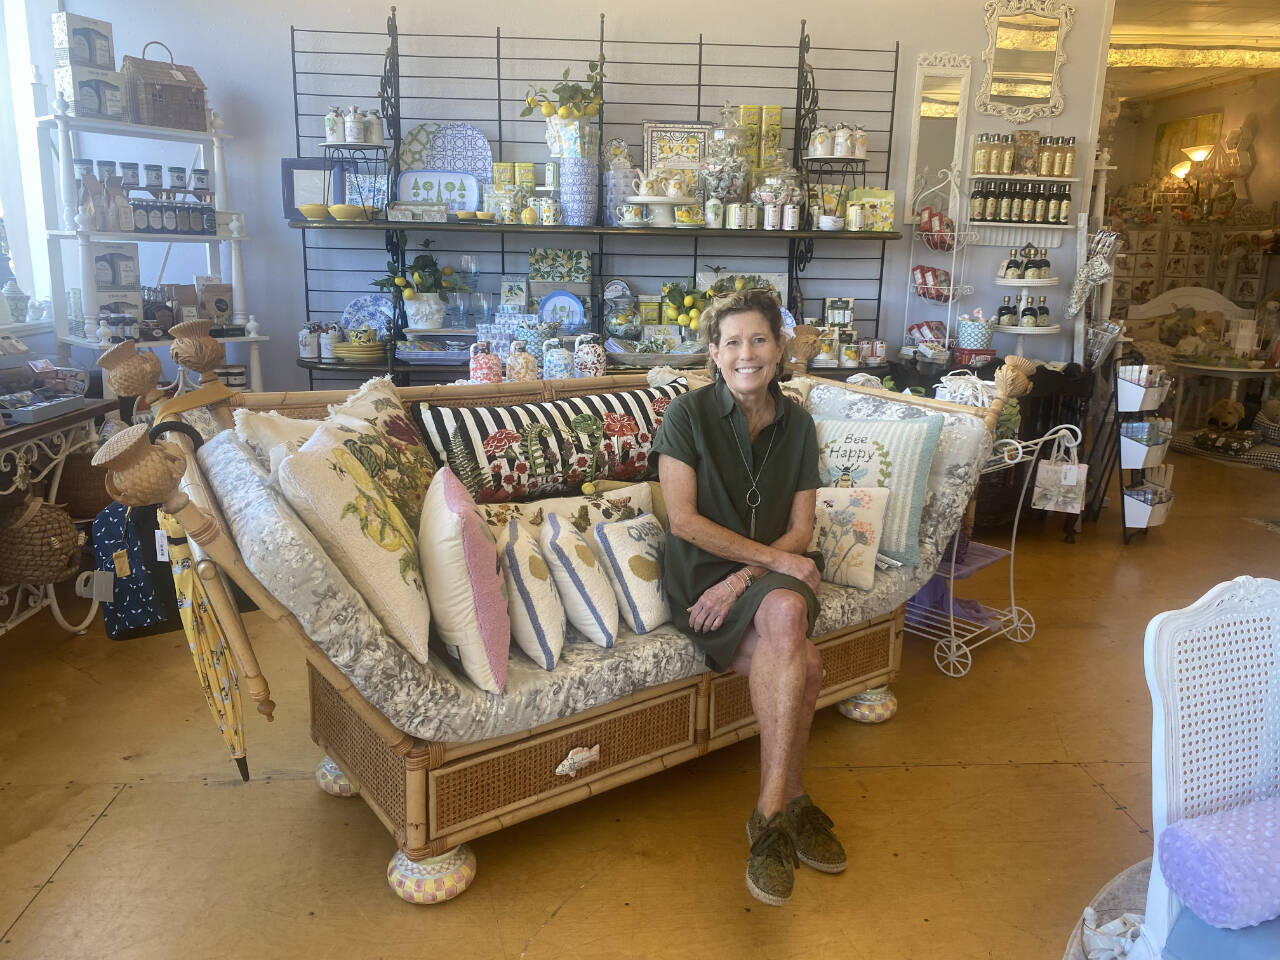 Sequim Gazette photos by Megan Rogers 
A highlight for Laura Segil since opening her store is being part of the community.